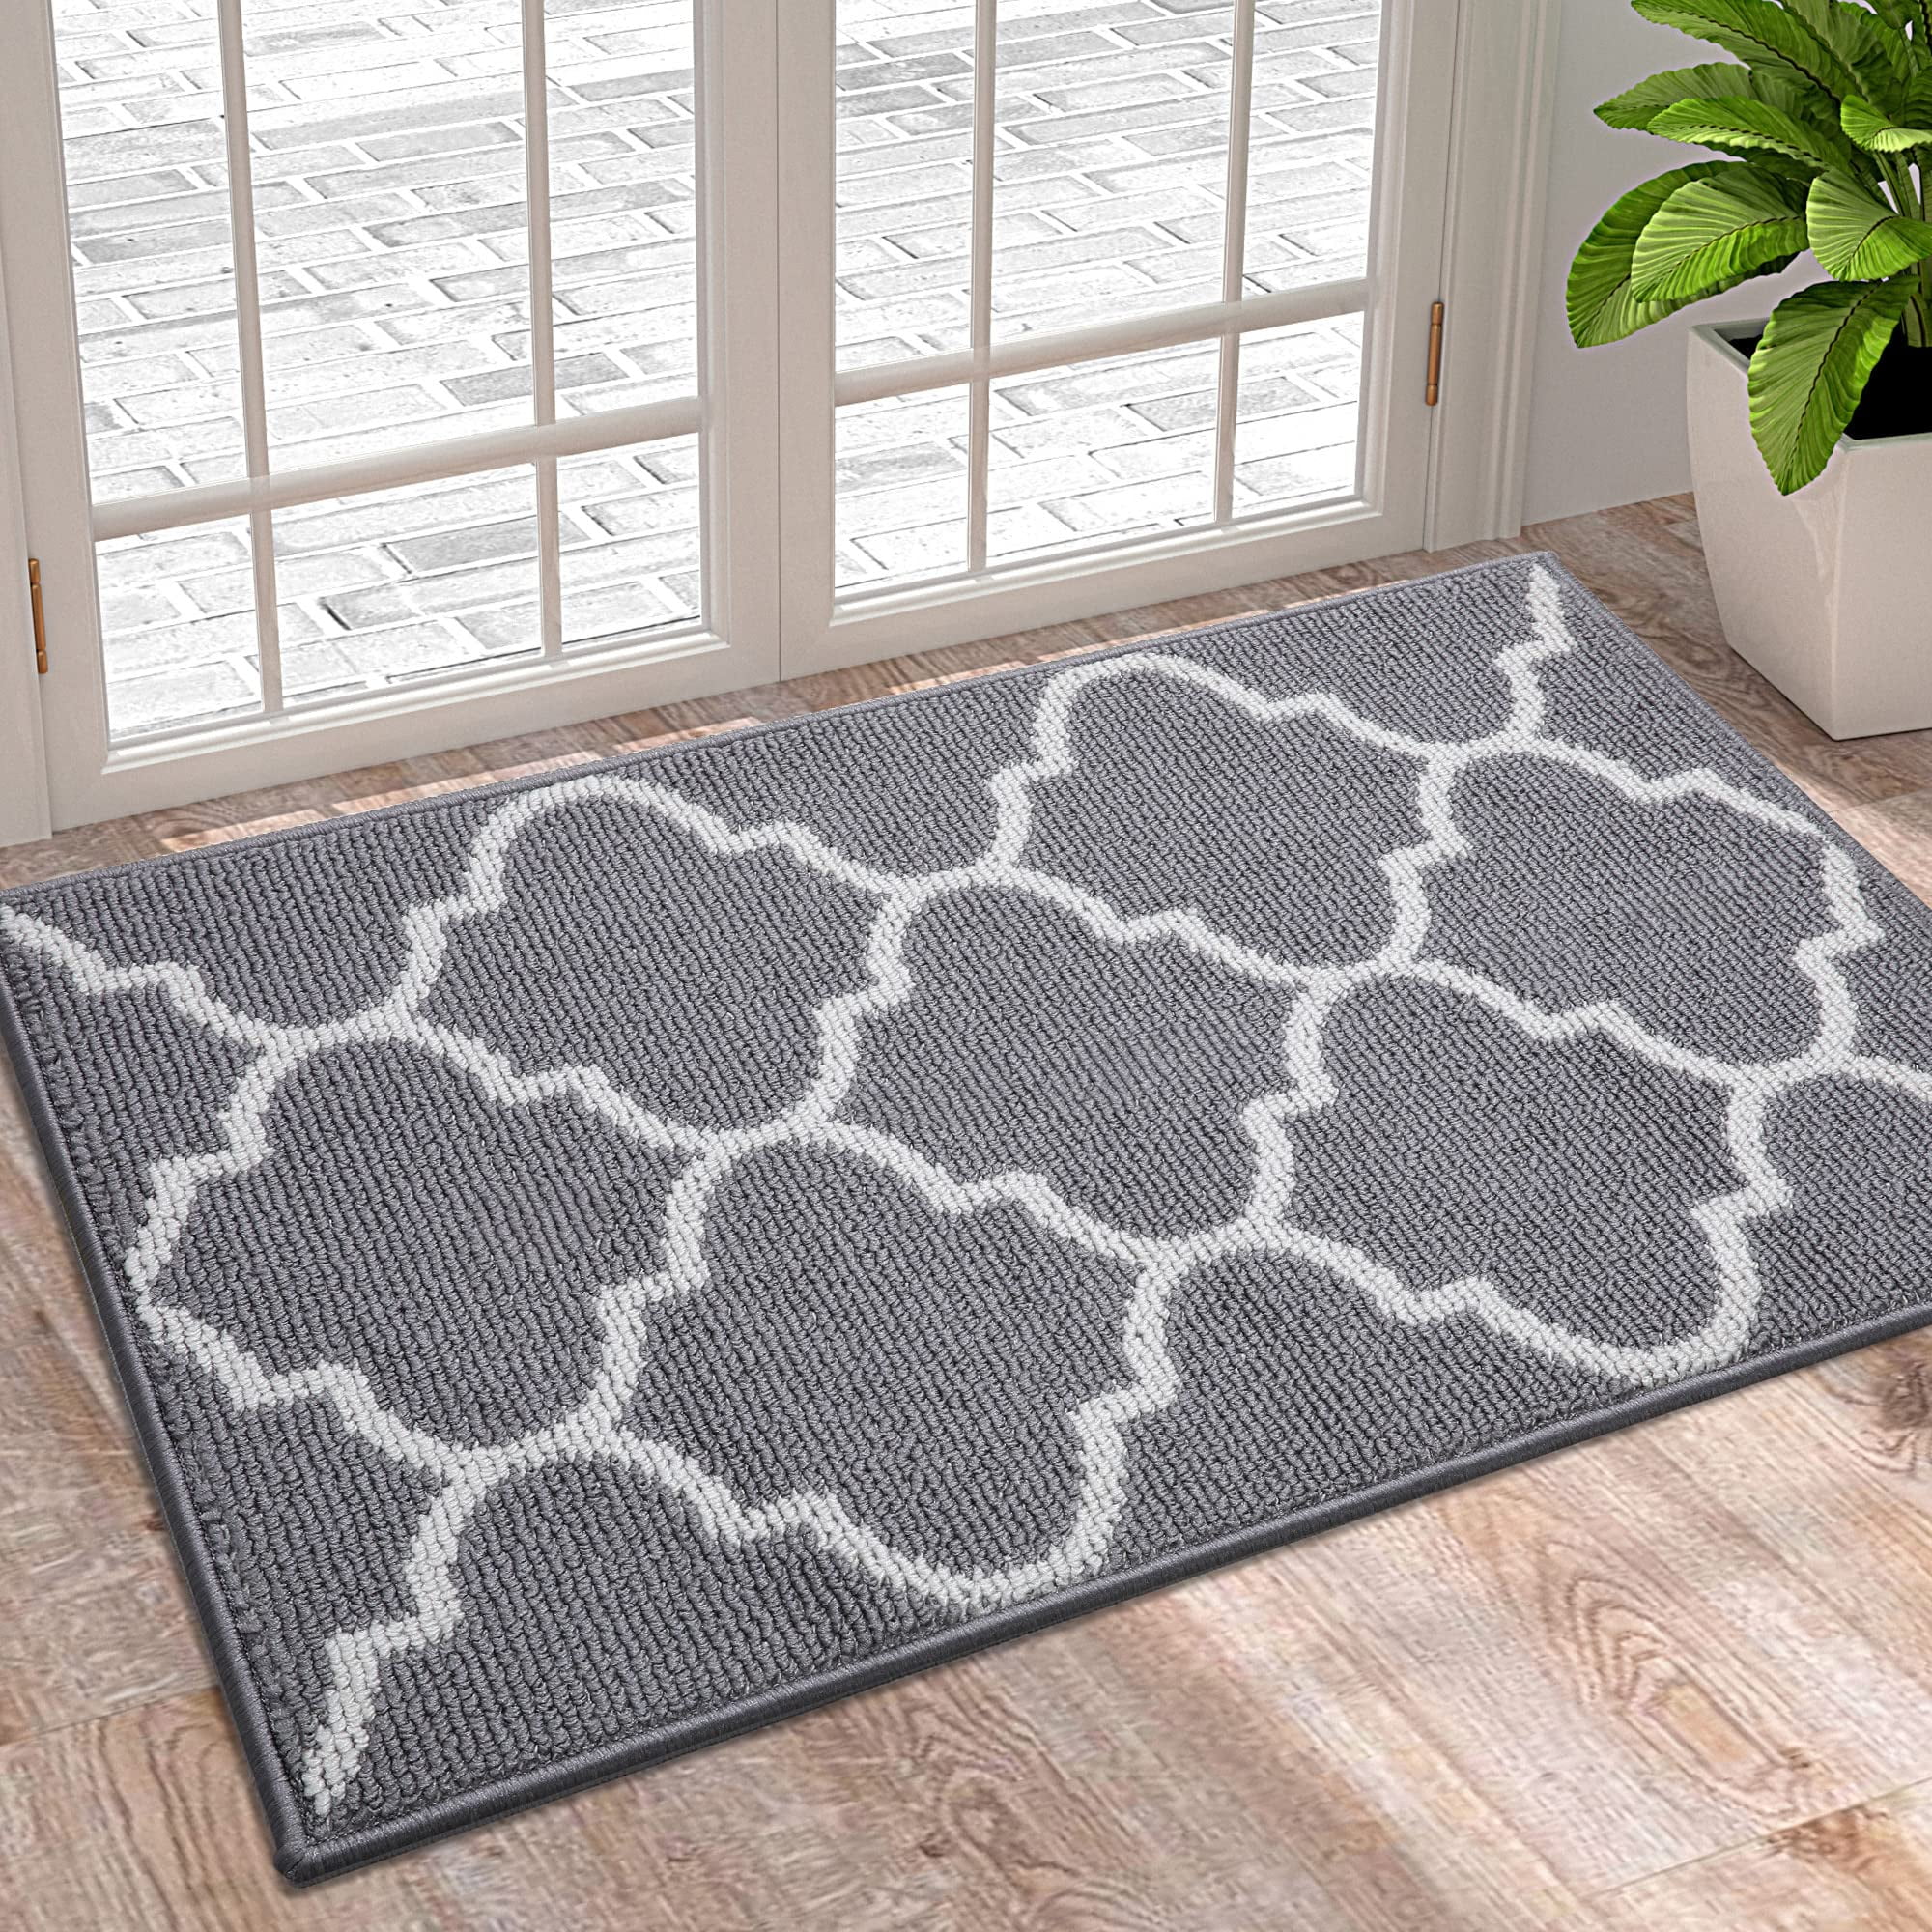 Welcome Doormat Easy Clean Rug Mats for Entry Machine Washable Indoor Carpet Doormats with Beautiful Mountains Art Illustration 19.5Wx31.5L Non-Slip Entrance Floor Rug